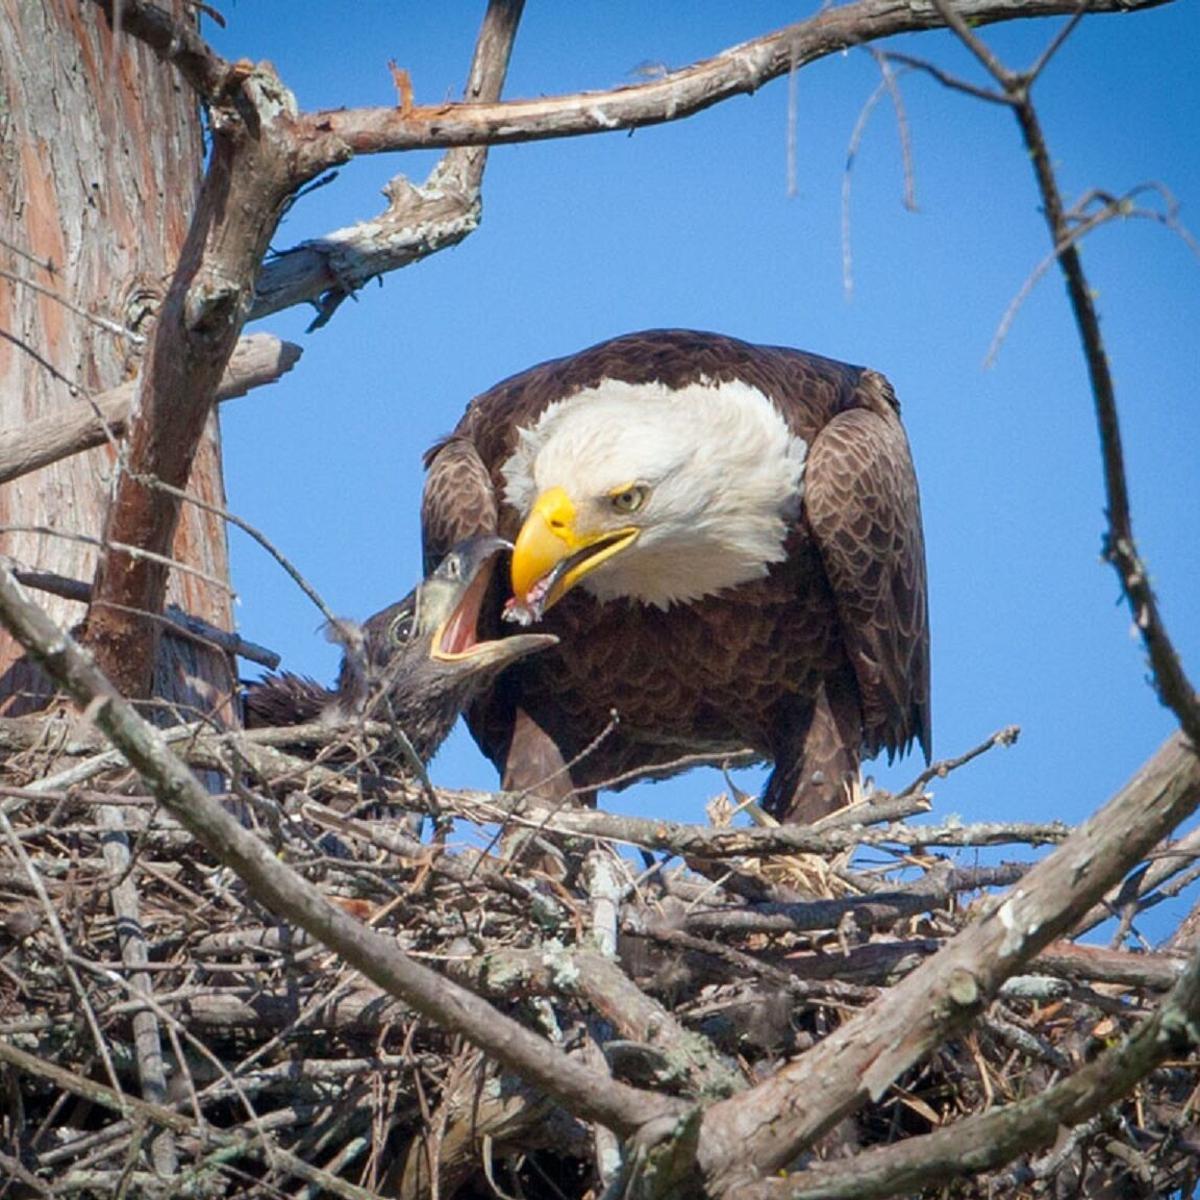 Now's the time to catch a glimpse of the majestic bald eagle |  Entertainment/Life | theadvocate.com